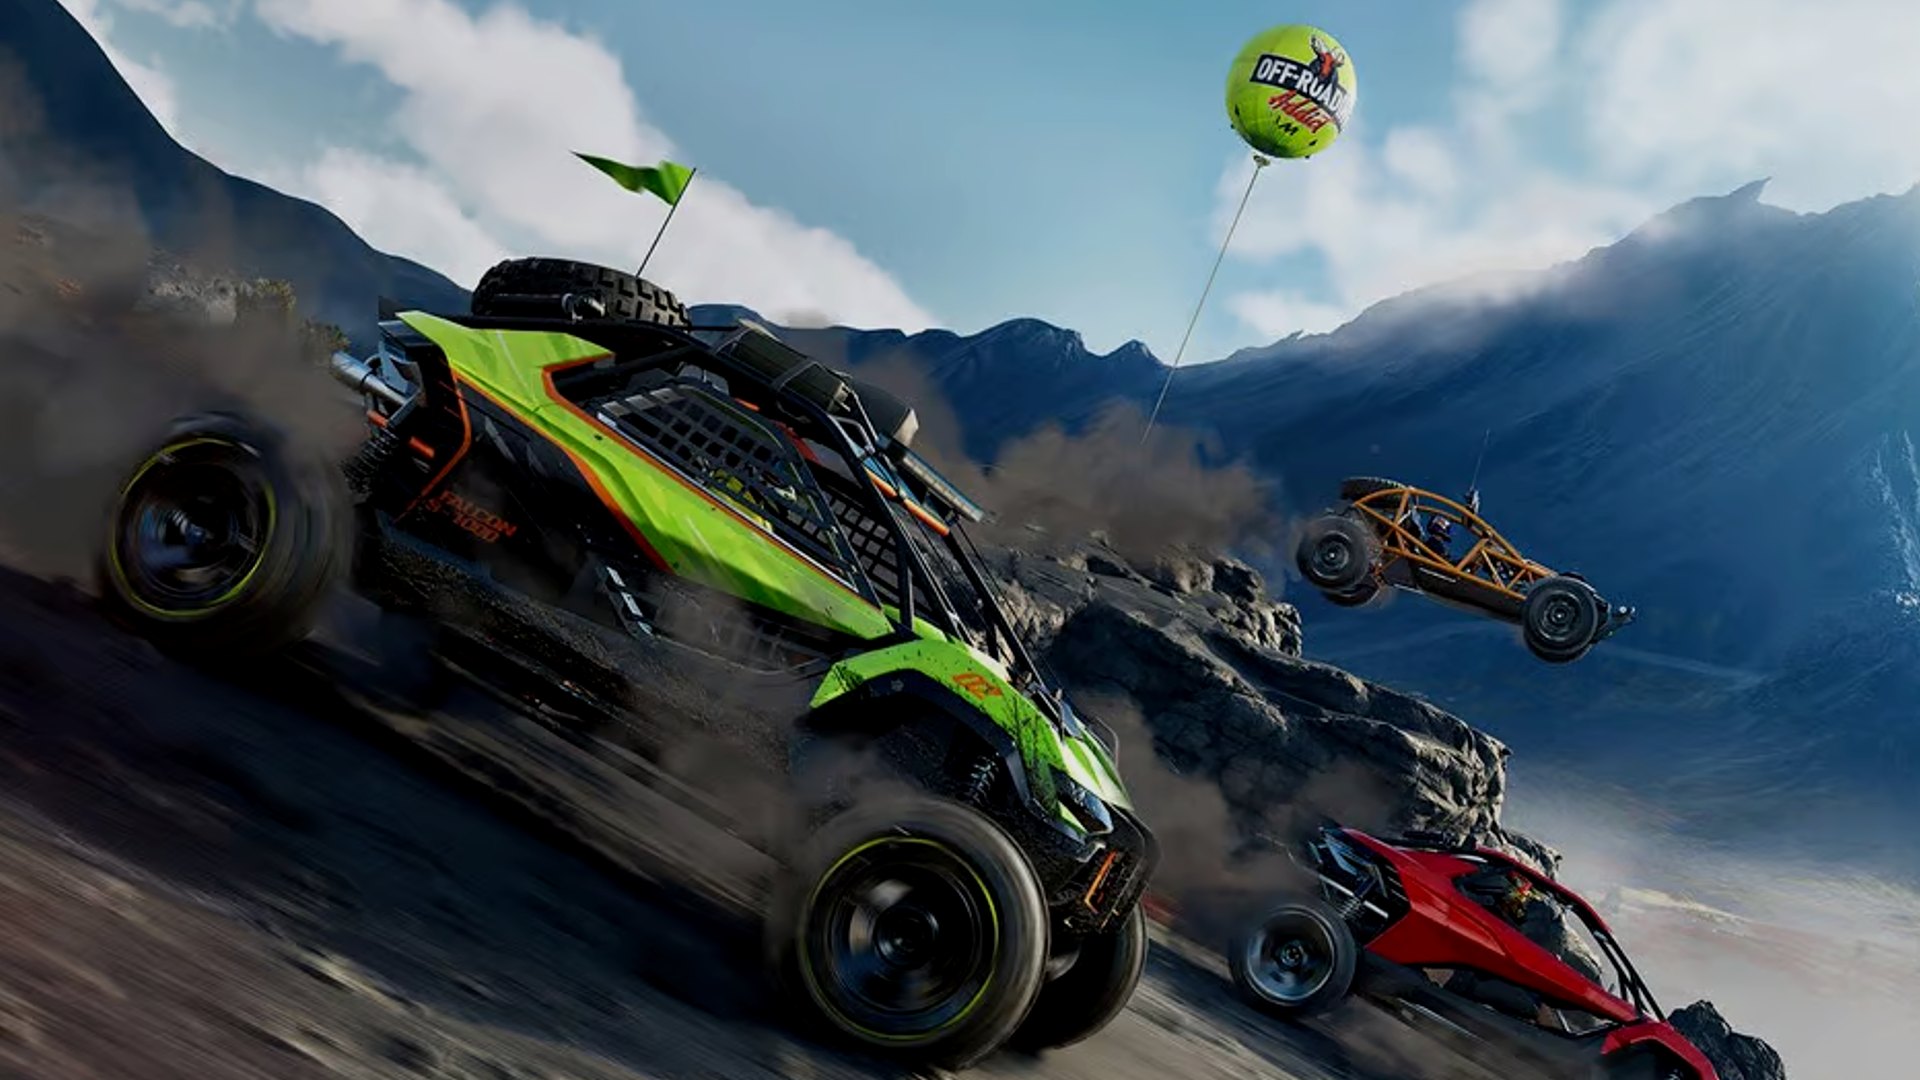 Can you play The Crew Motorfest with friends thanks to crossplay?